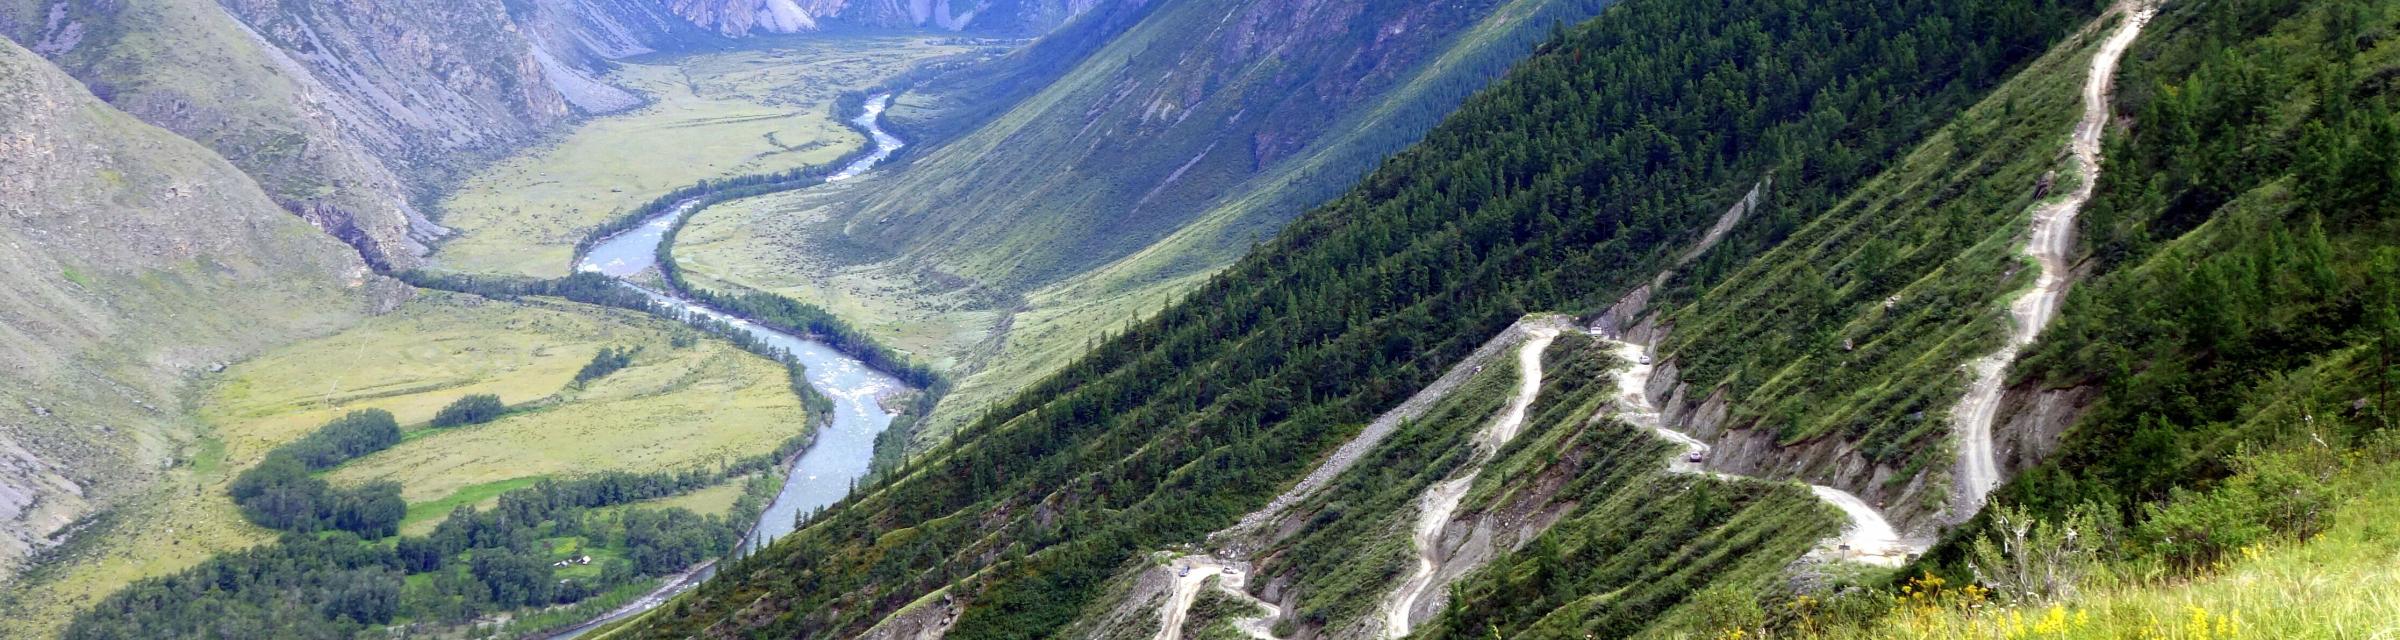 MediaWorks R62684_N_No_restrictions_Mountain_pass_in_the_Republic_of_Altai_-_Siberia,_Russia_.jpg